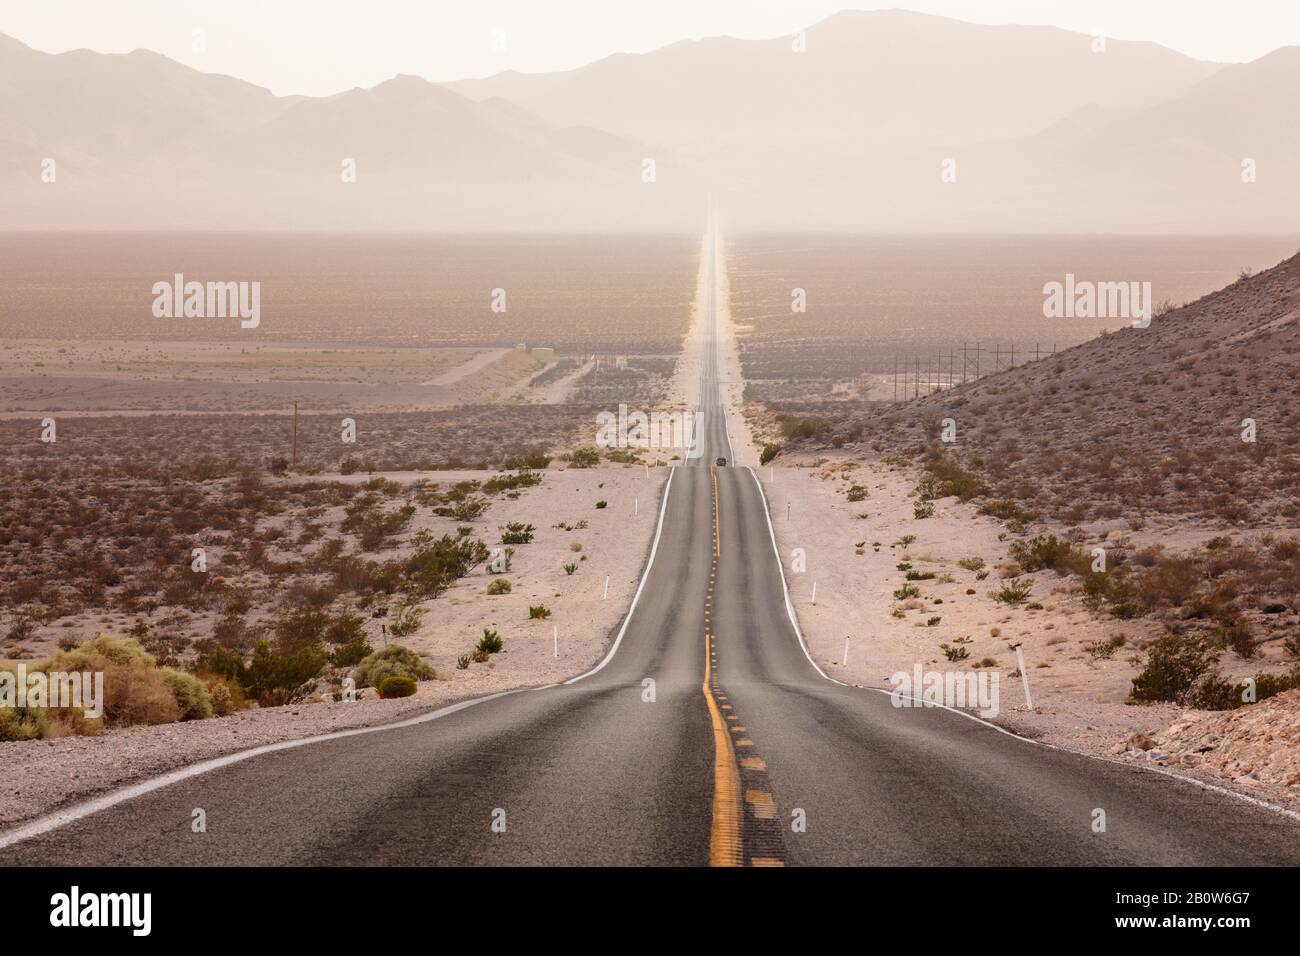 The Road to Death Valley Stock Photo